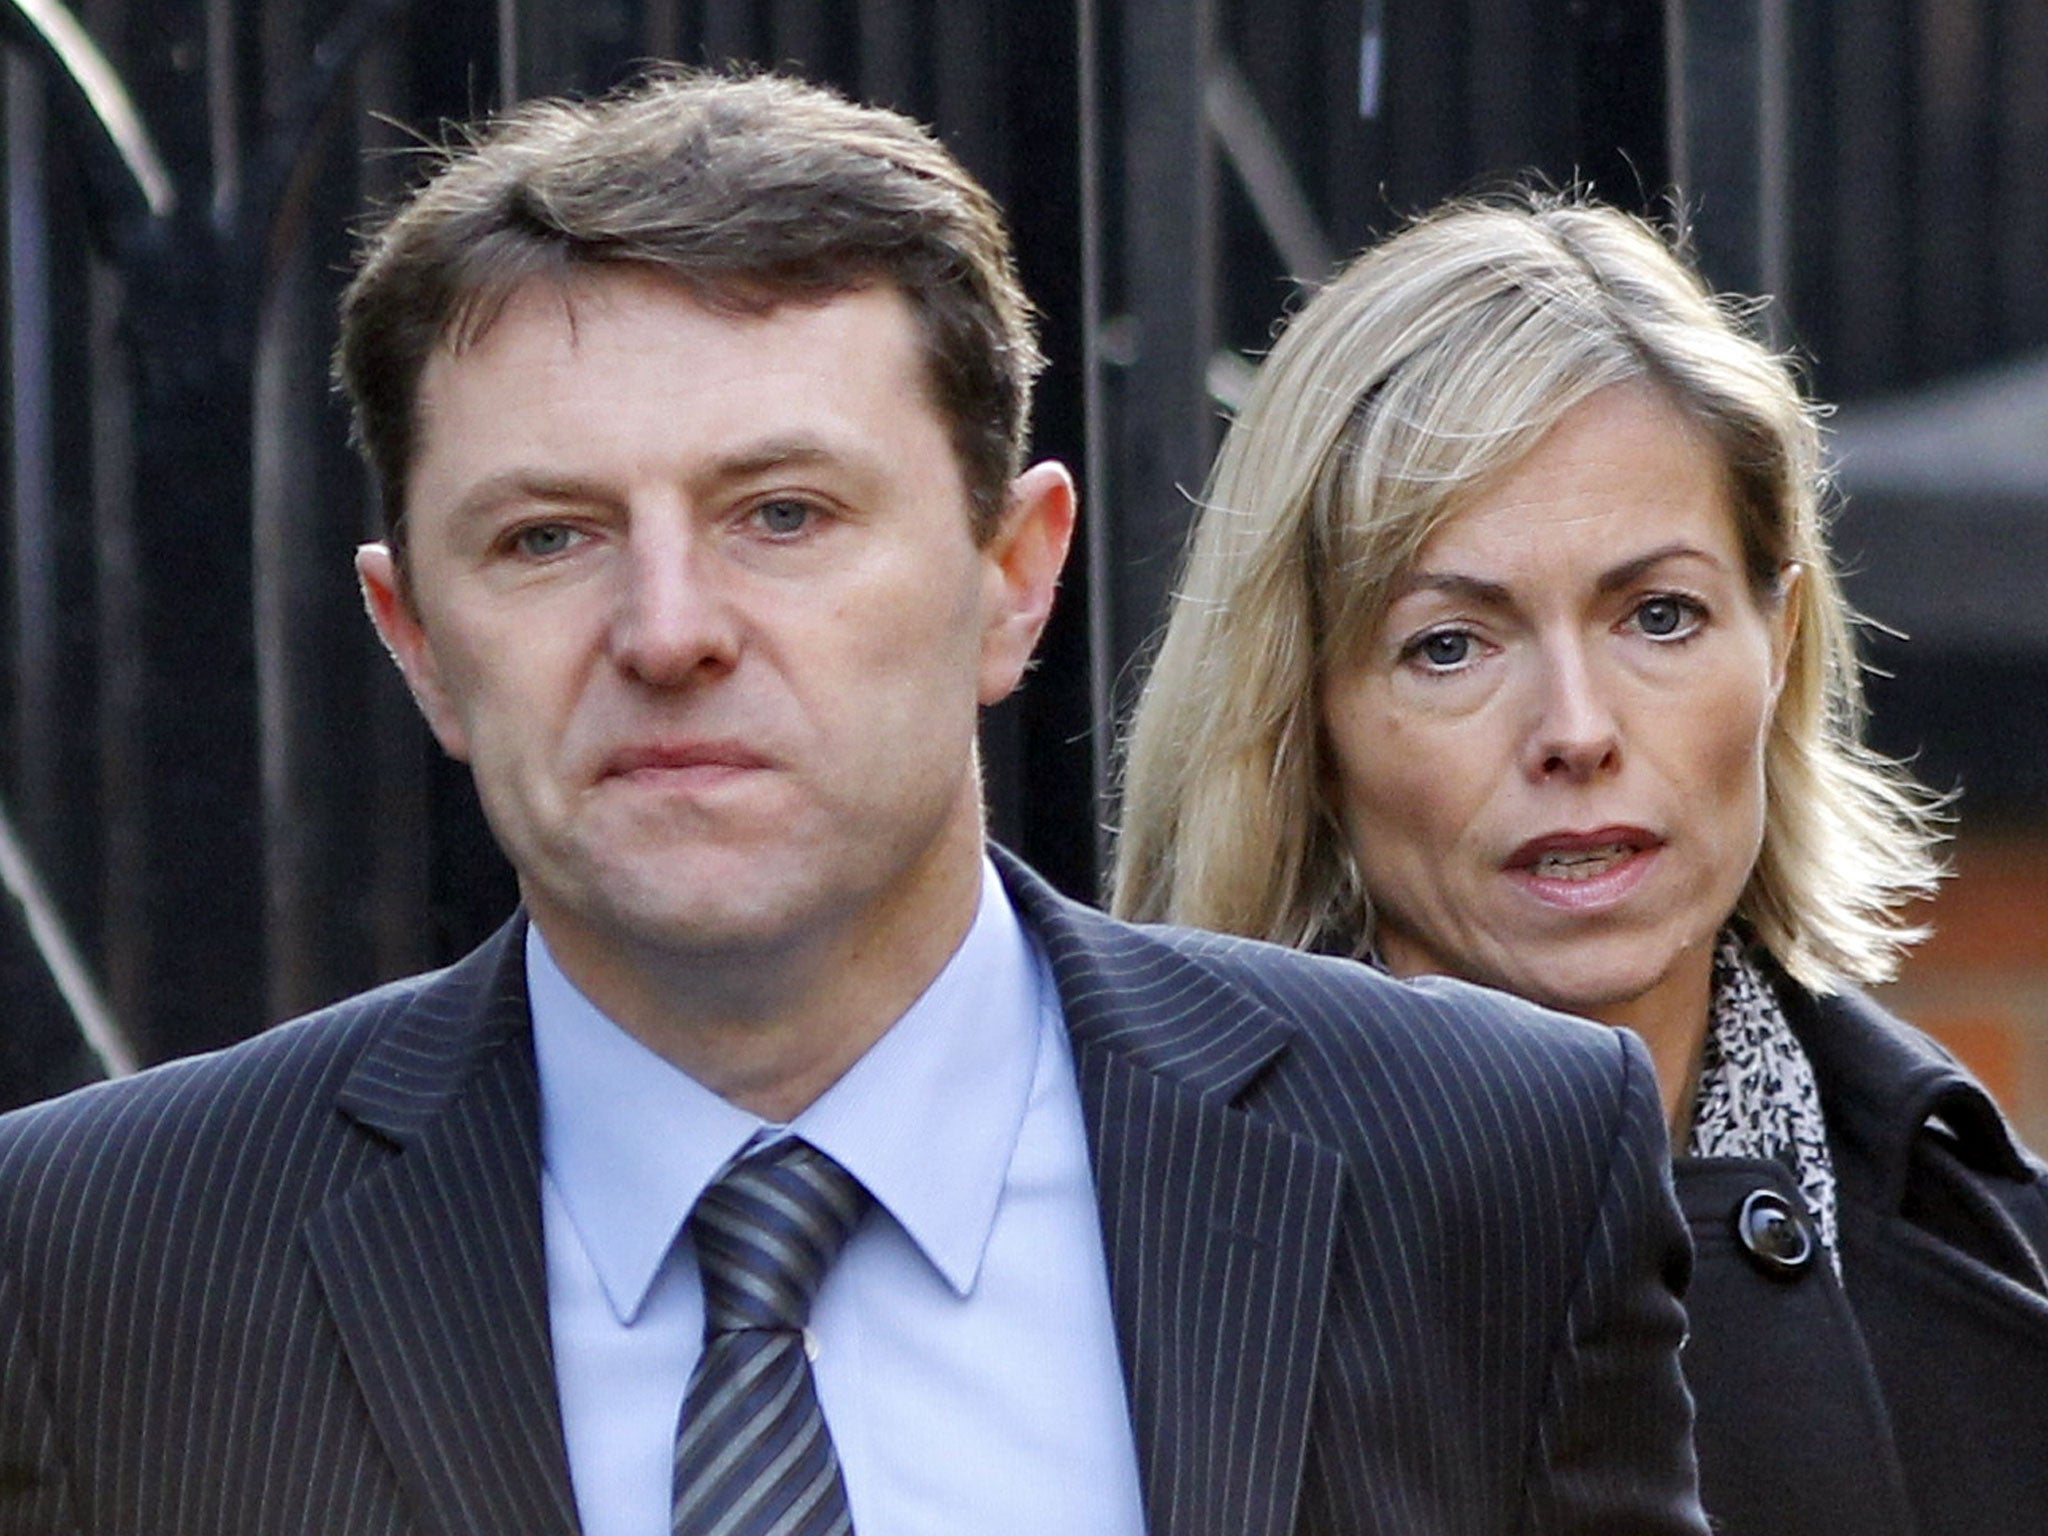 Kate and Gerry McCann are being treated with kid gloves by the media